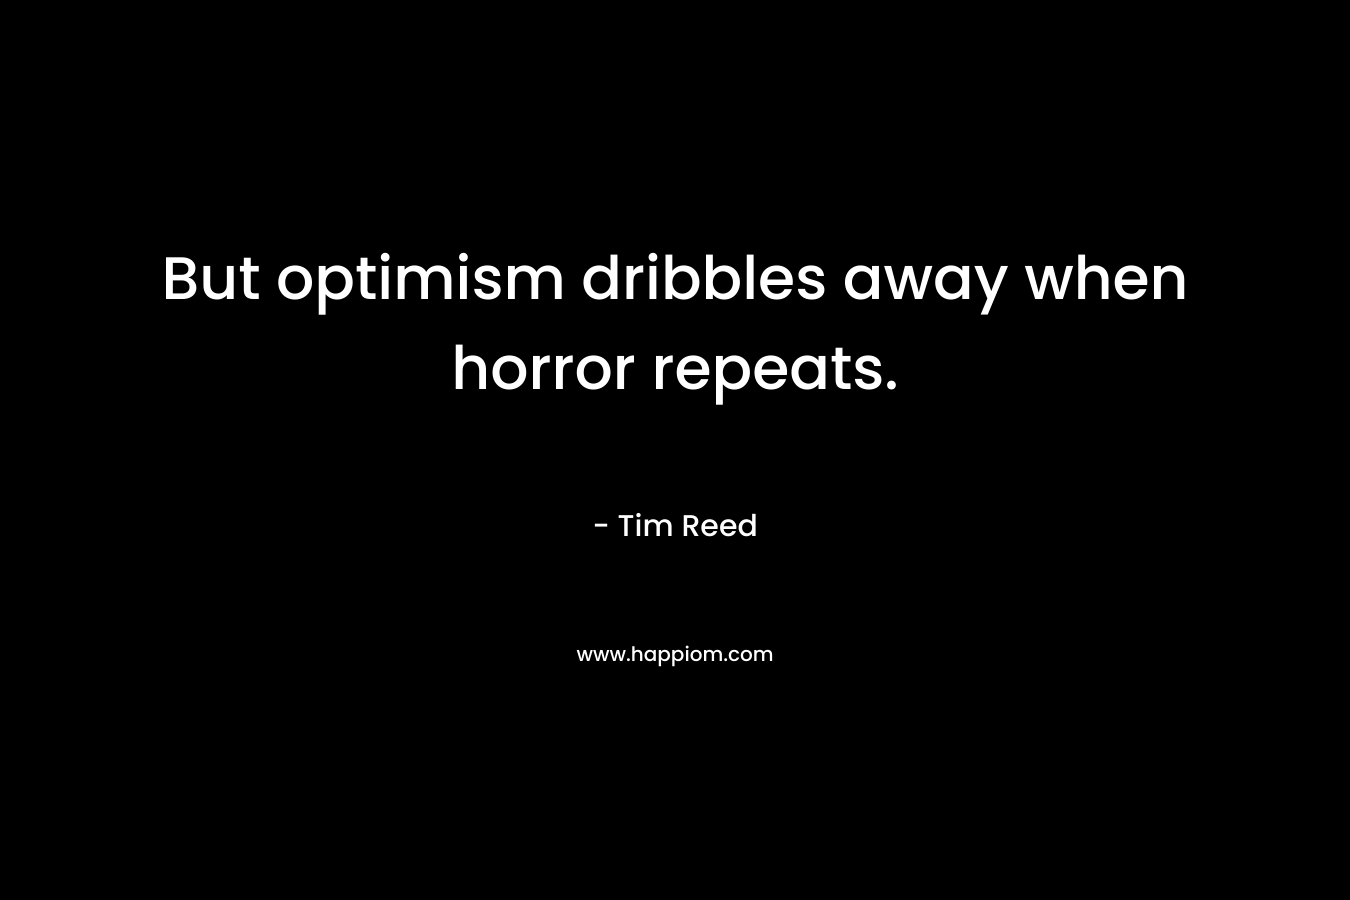 But optimism dribbles away when horror repeats. – Tim Reed